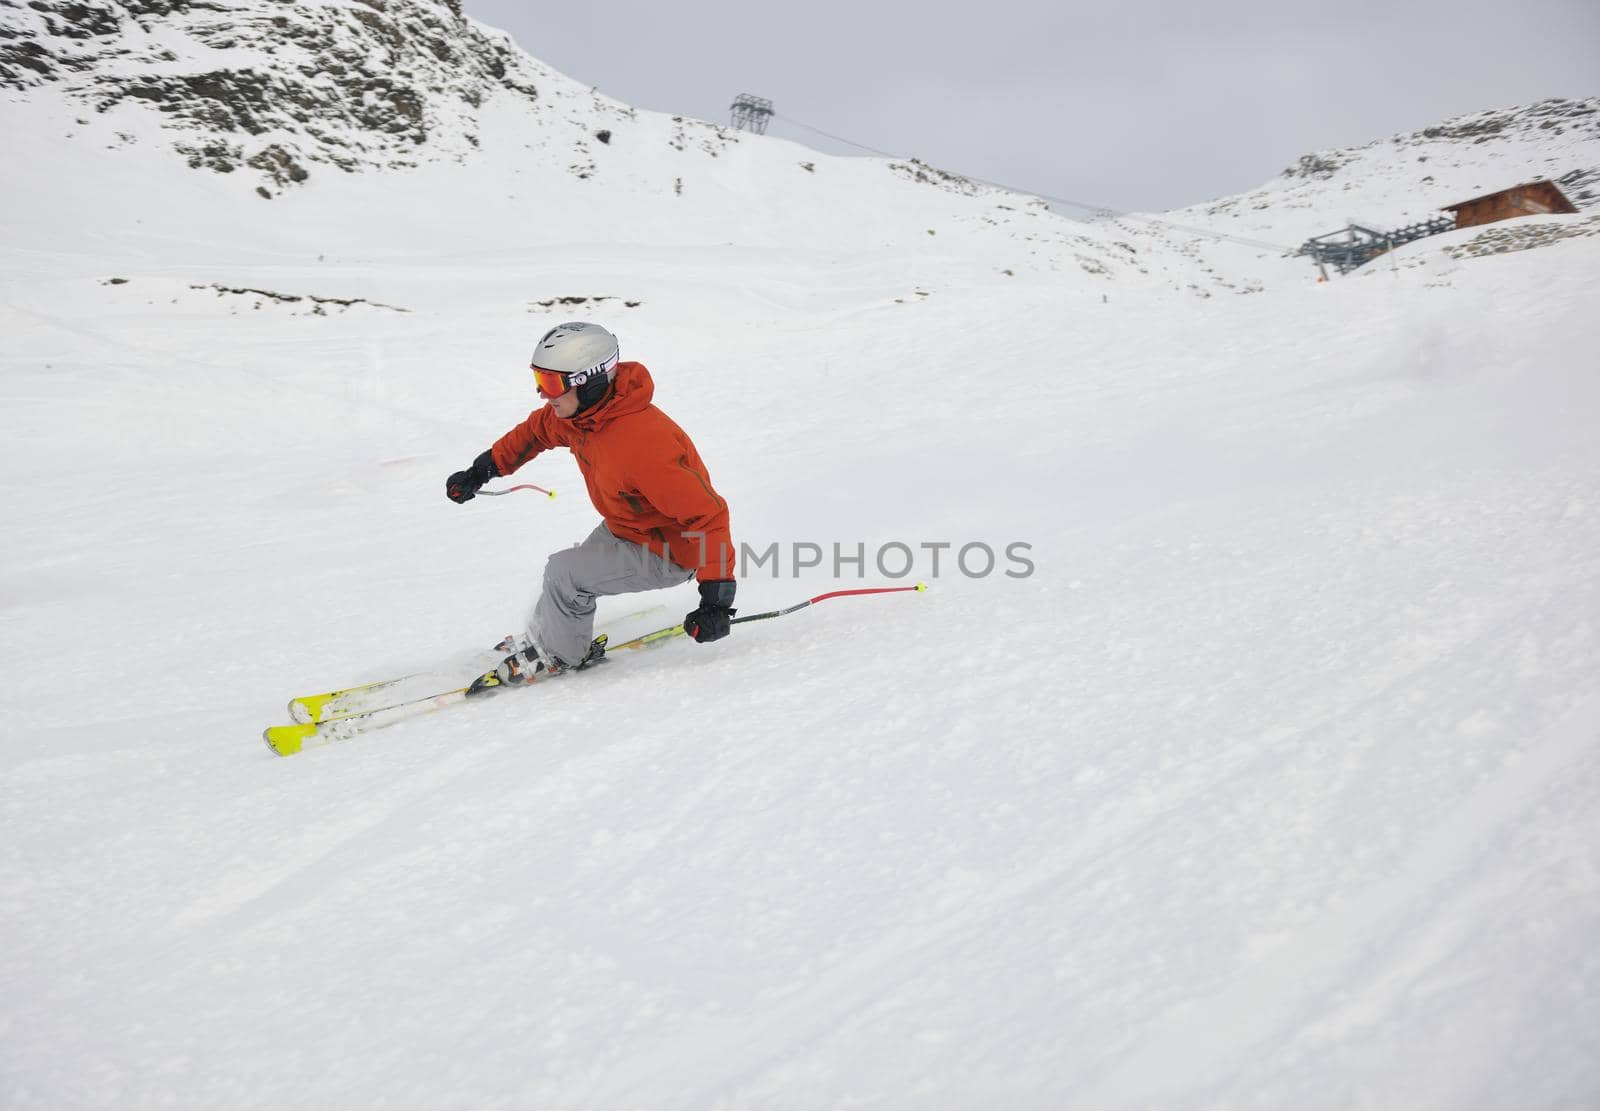  skiing on on now at winter season by dotshock